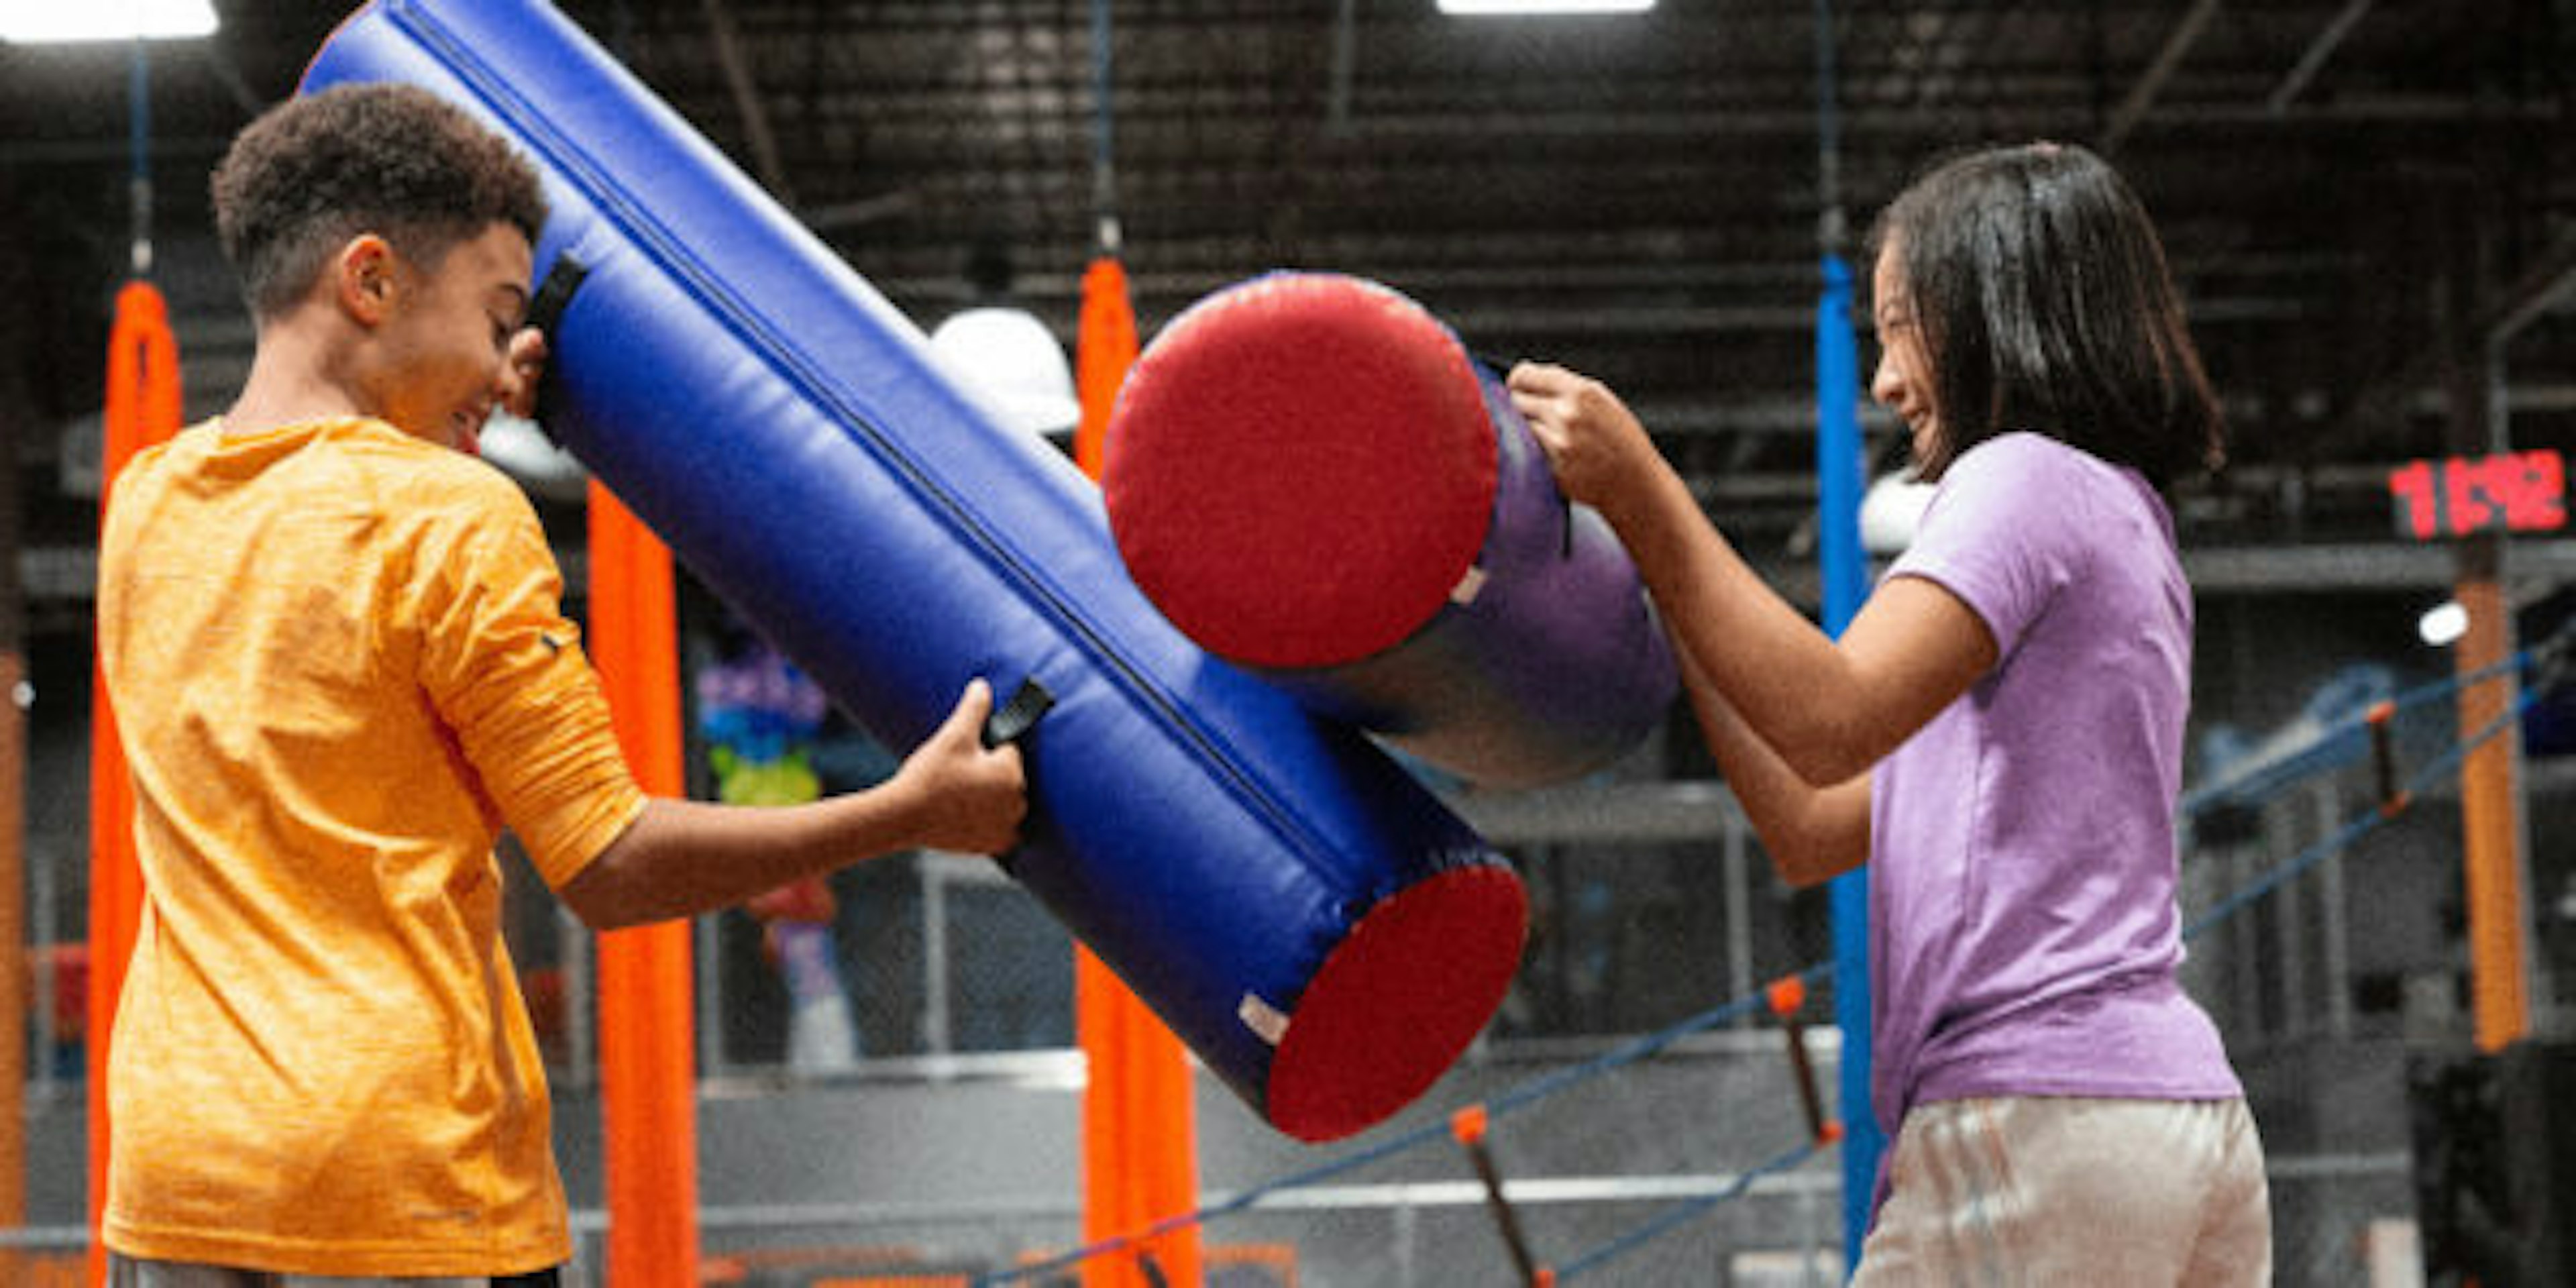 $3.00 OFF 90 Minutes of Jump Time